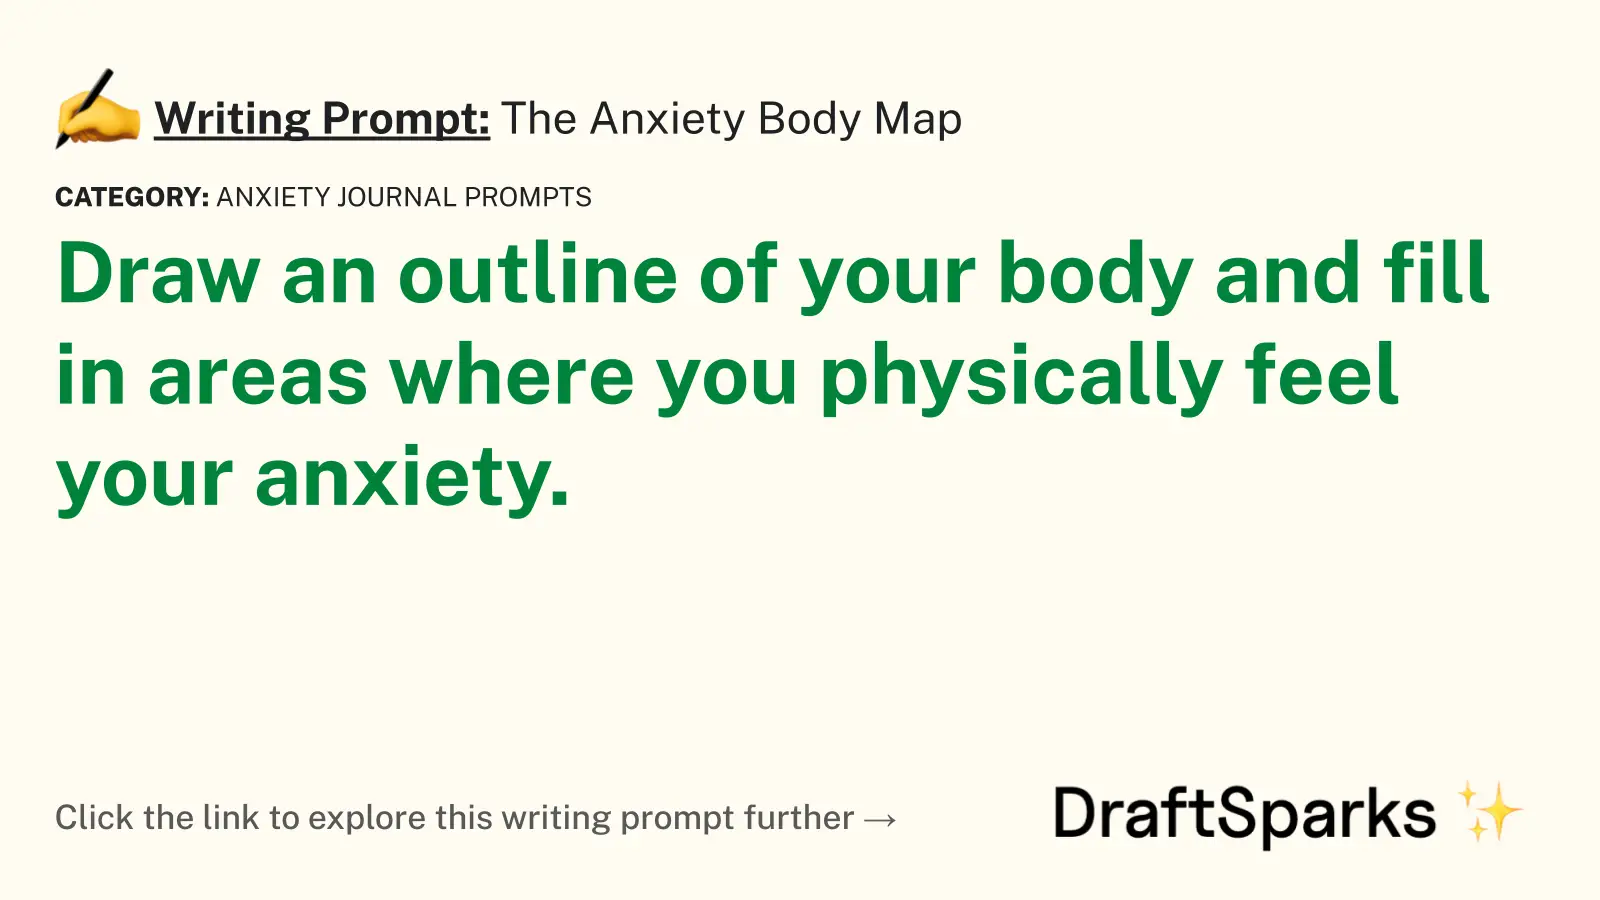 The Anxiety Body Map